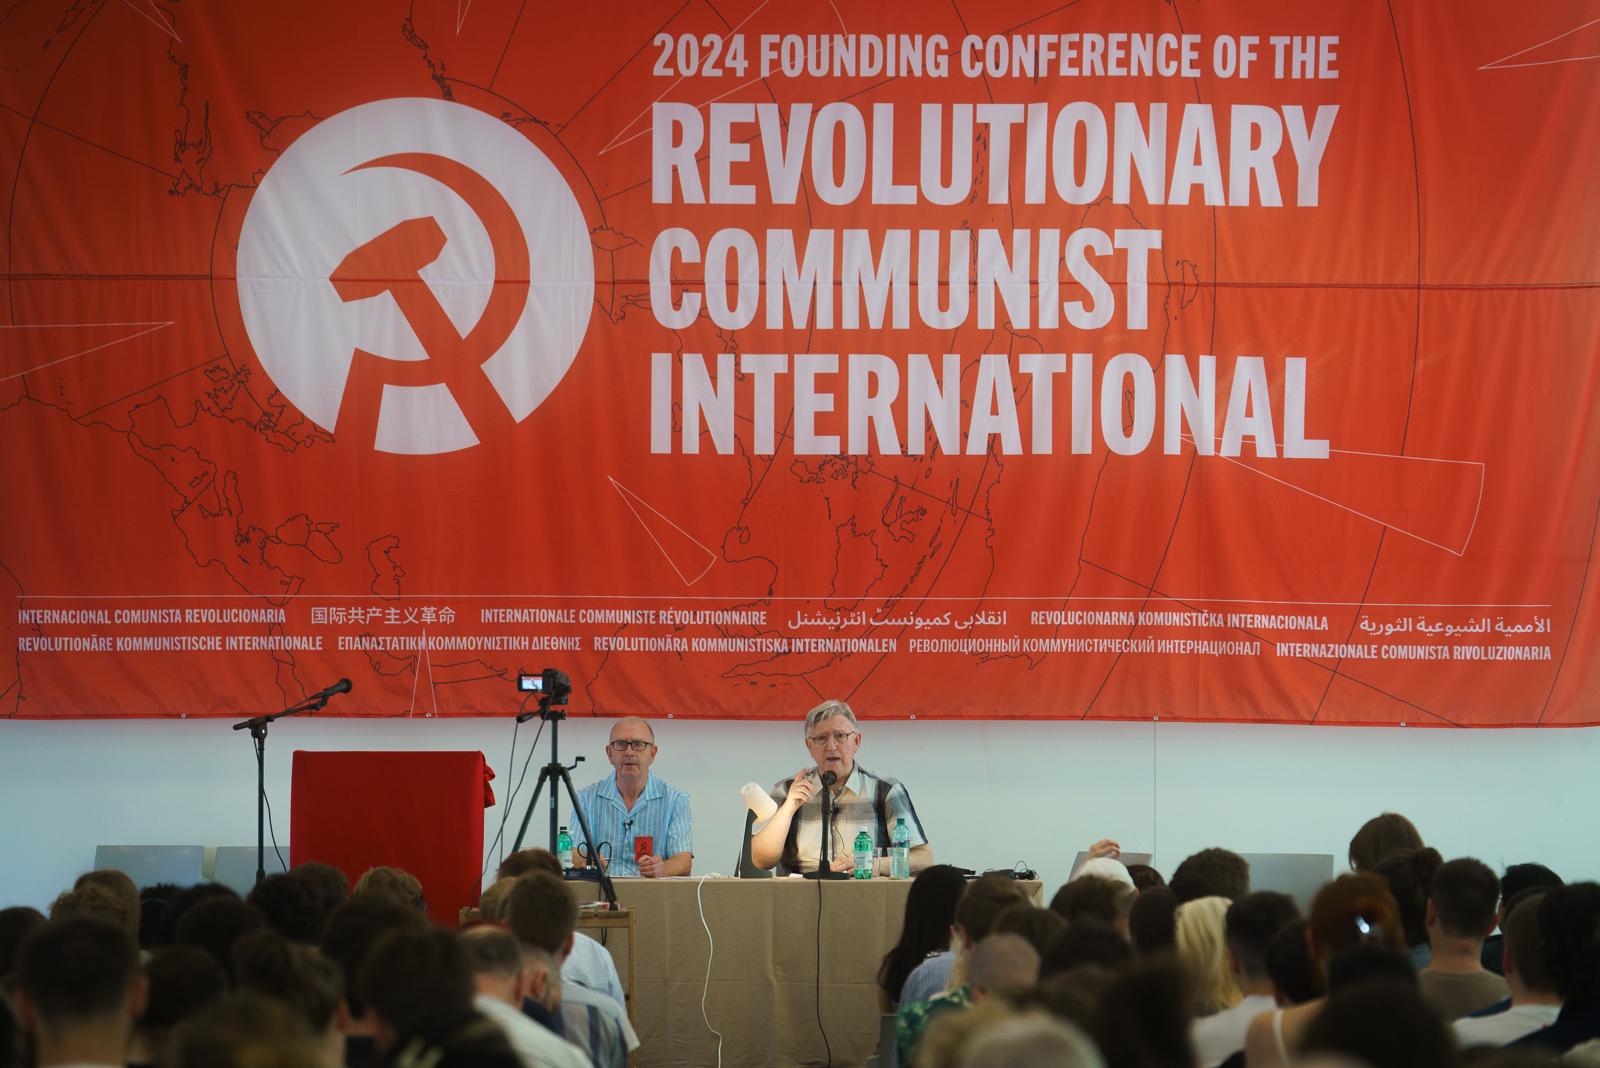 The founding conference of the Revolutionary Communist International begins!